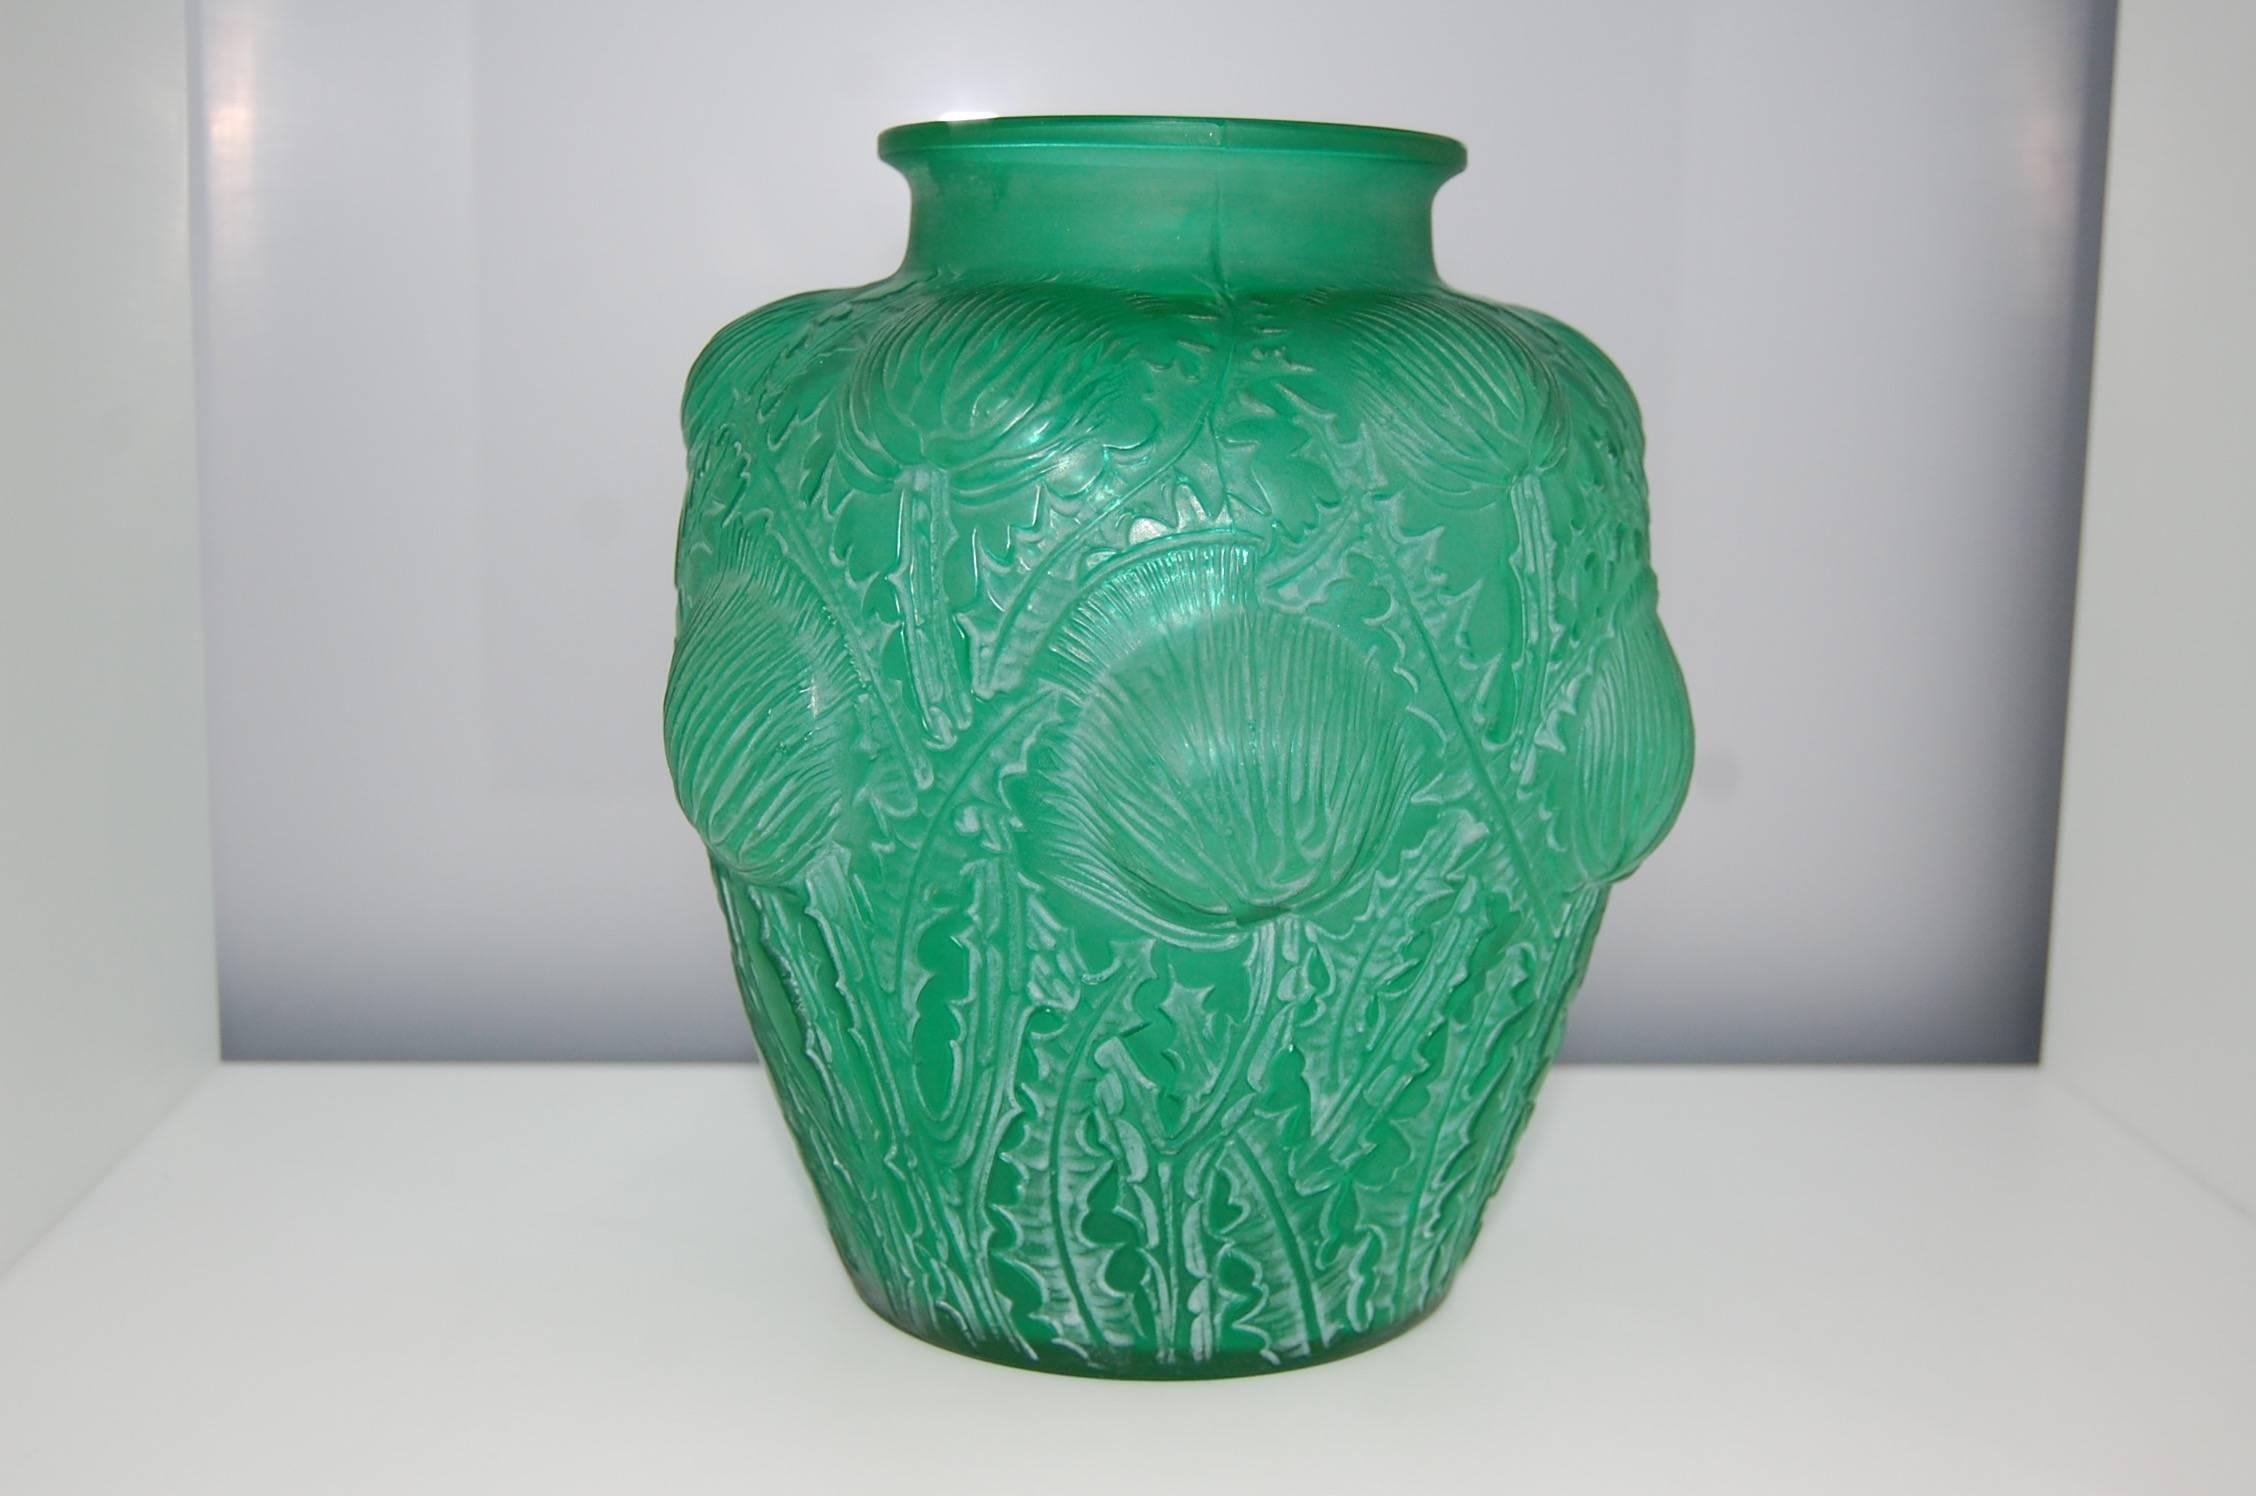 Cast Rare to Find Green ‘Domremy’ Vase by R. Lalique For Sale